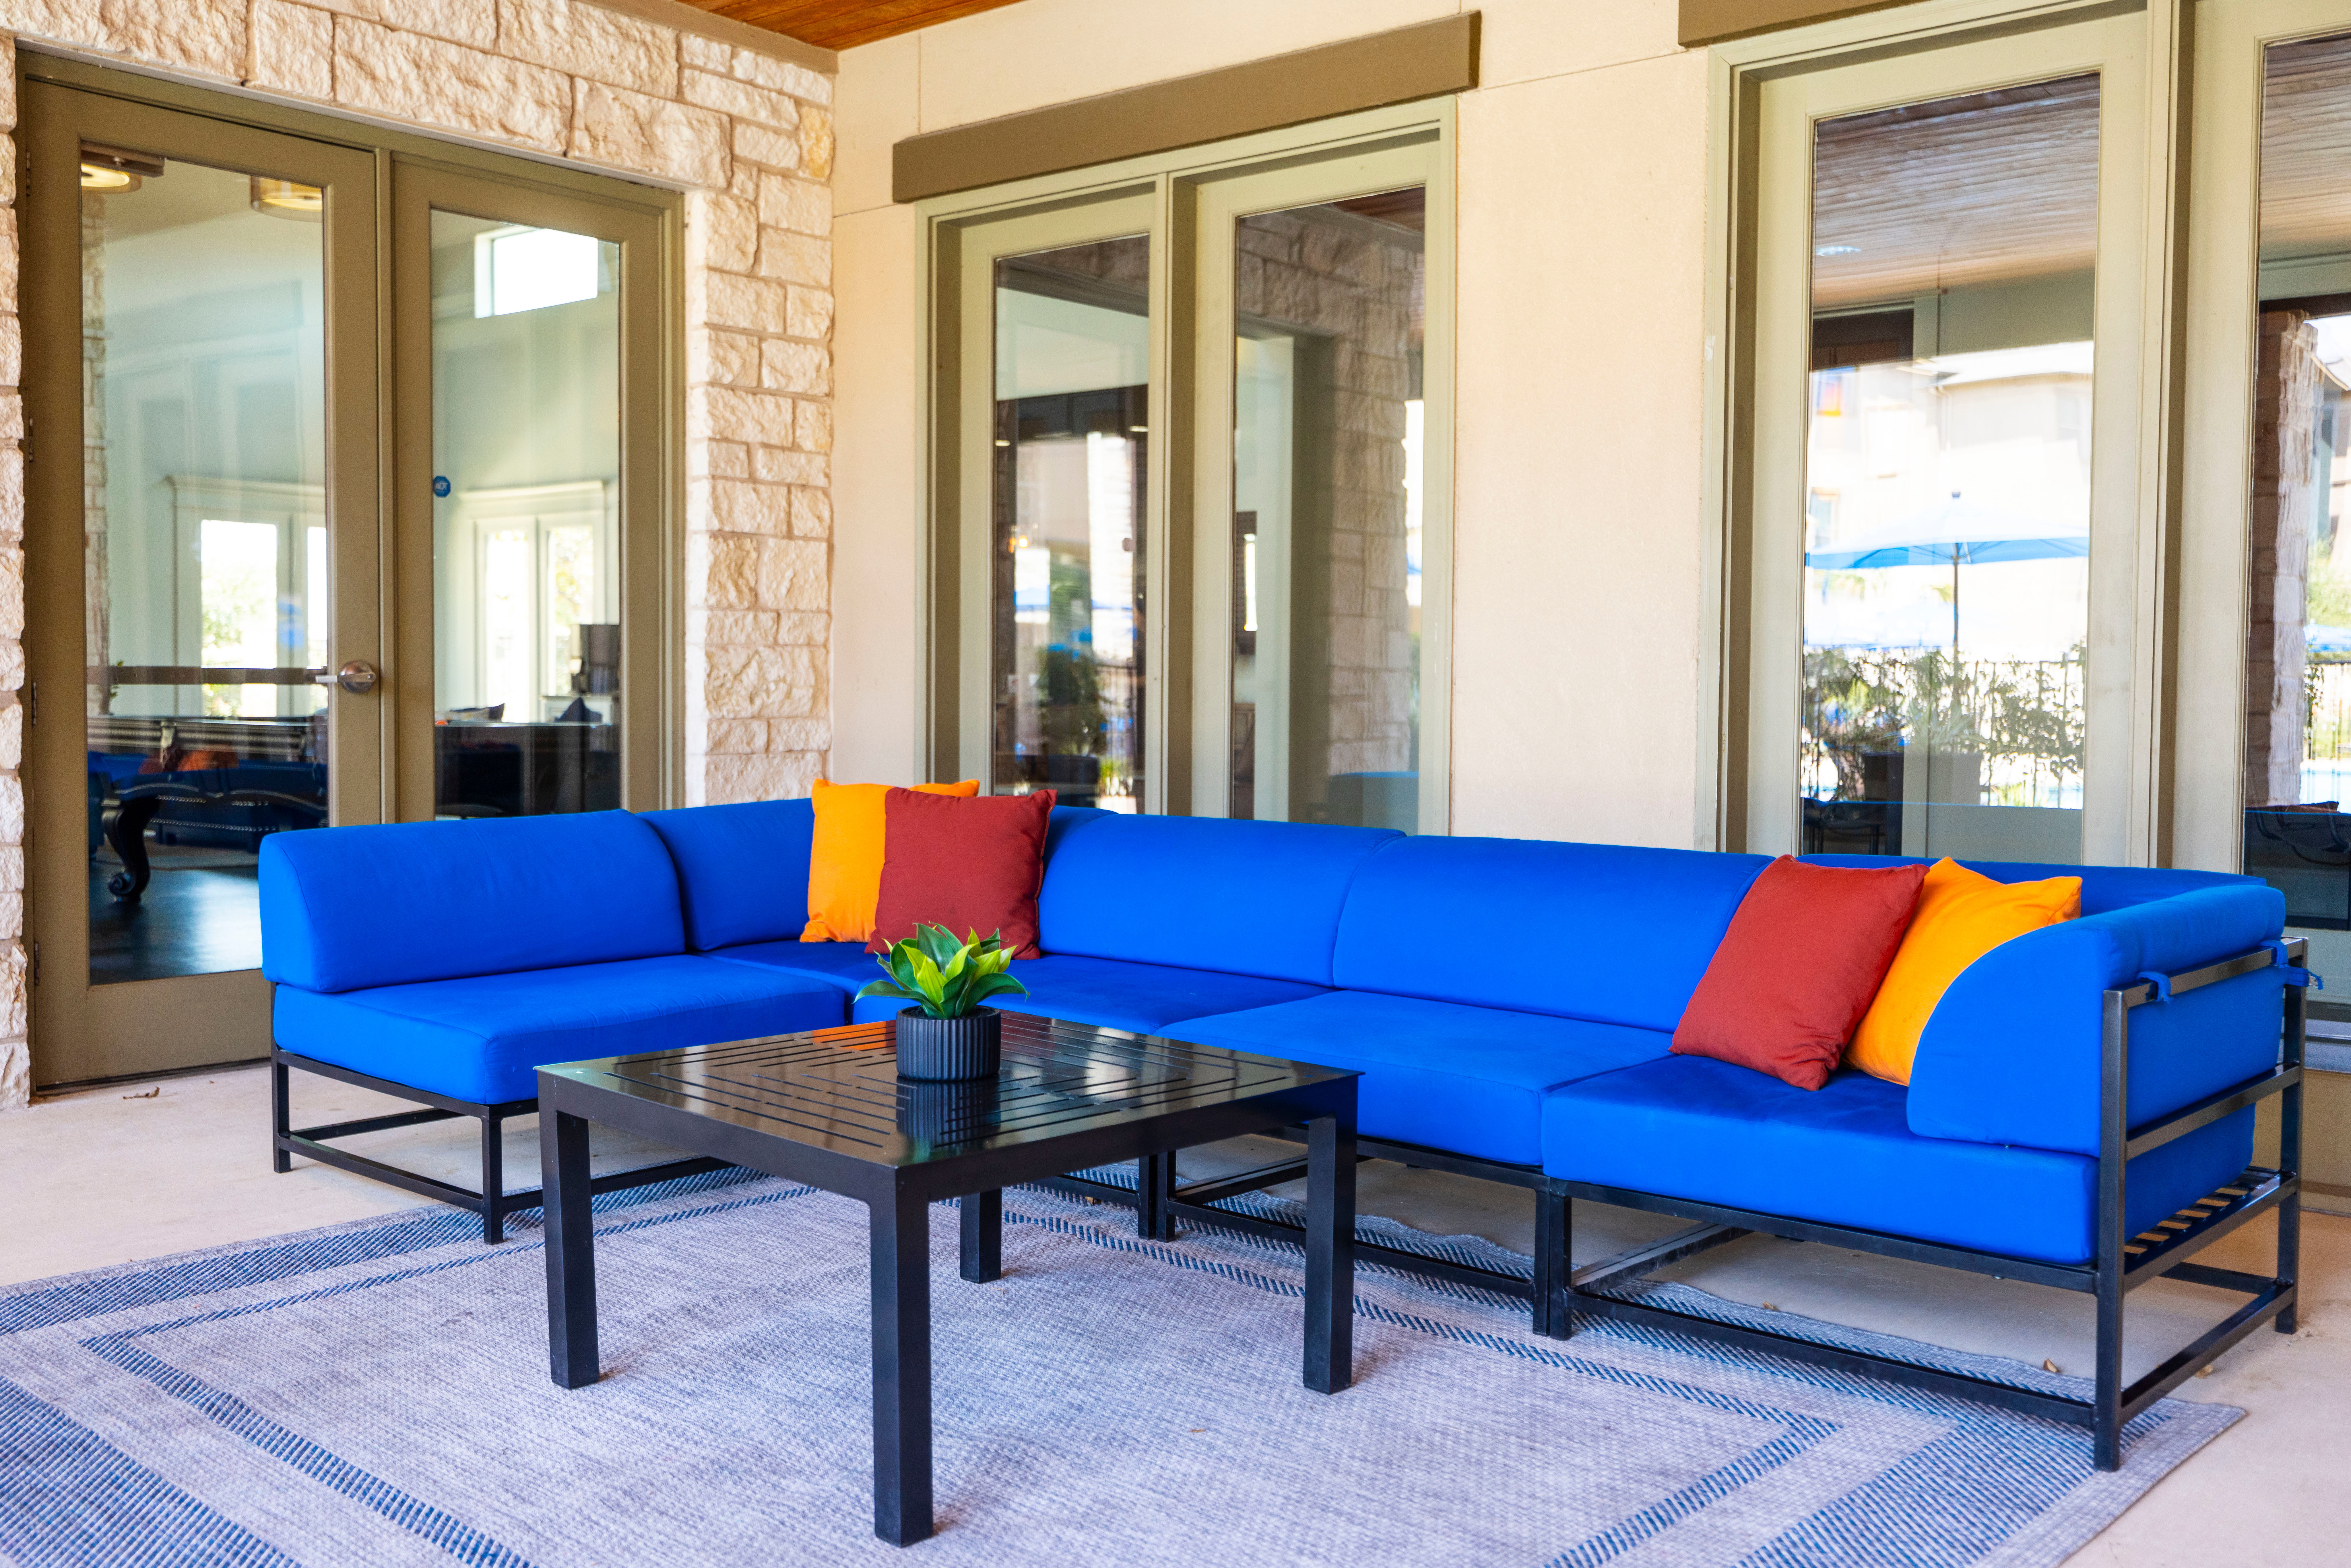 Covered outdoor lounge area at Carrington Oaks in Buda, Texas